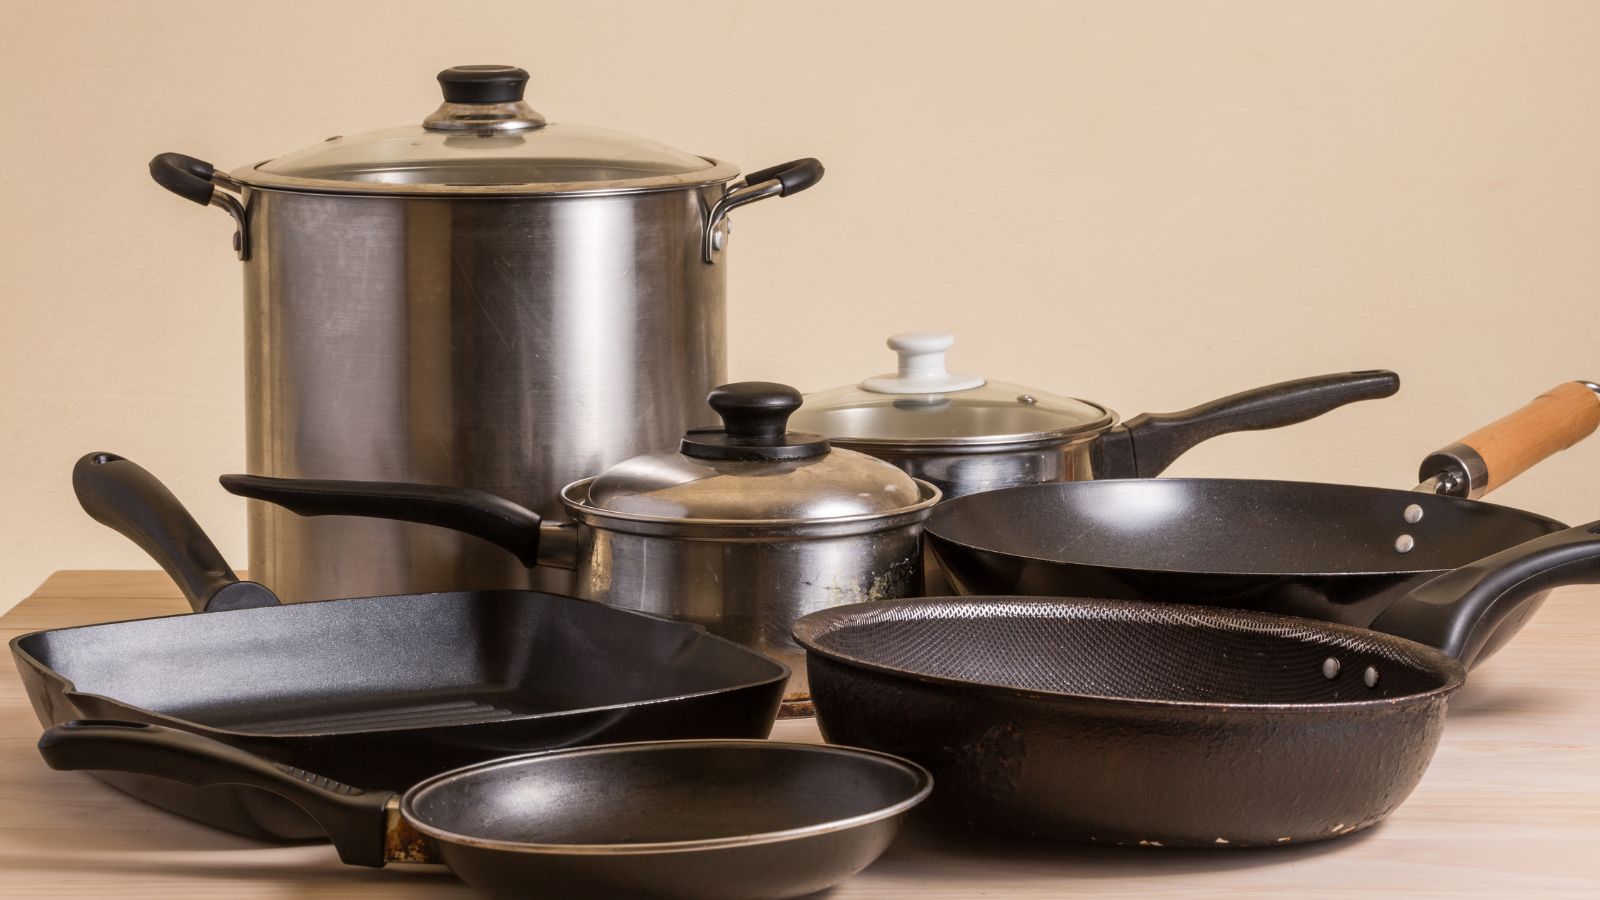 Tips for using your stovetop pans in the oven